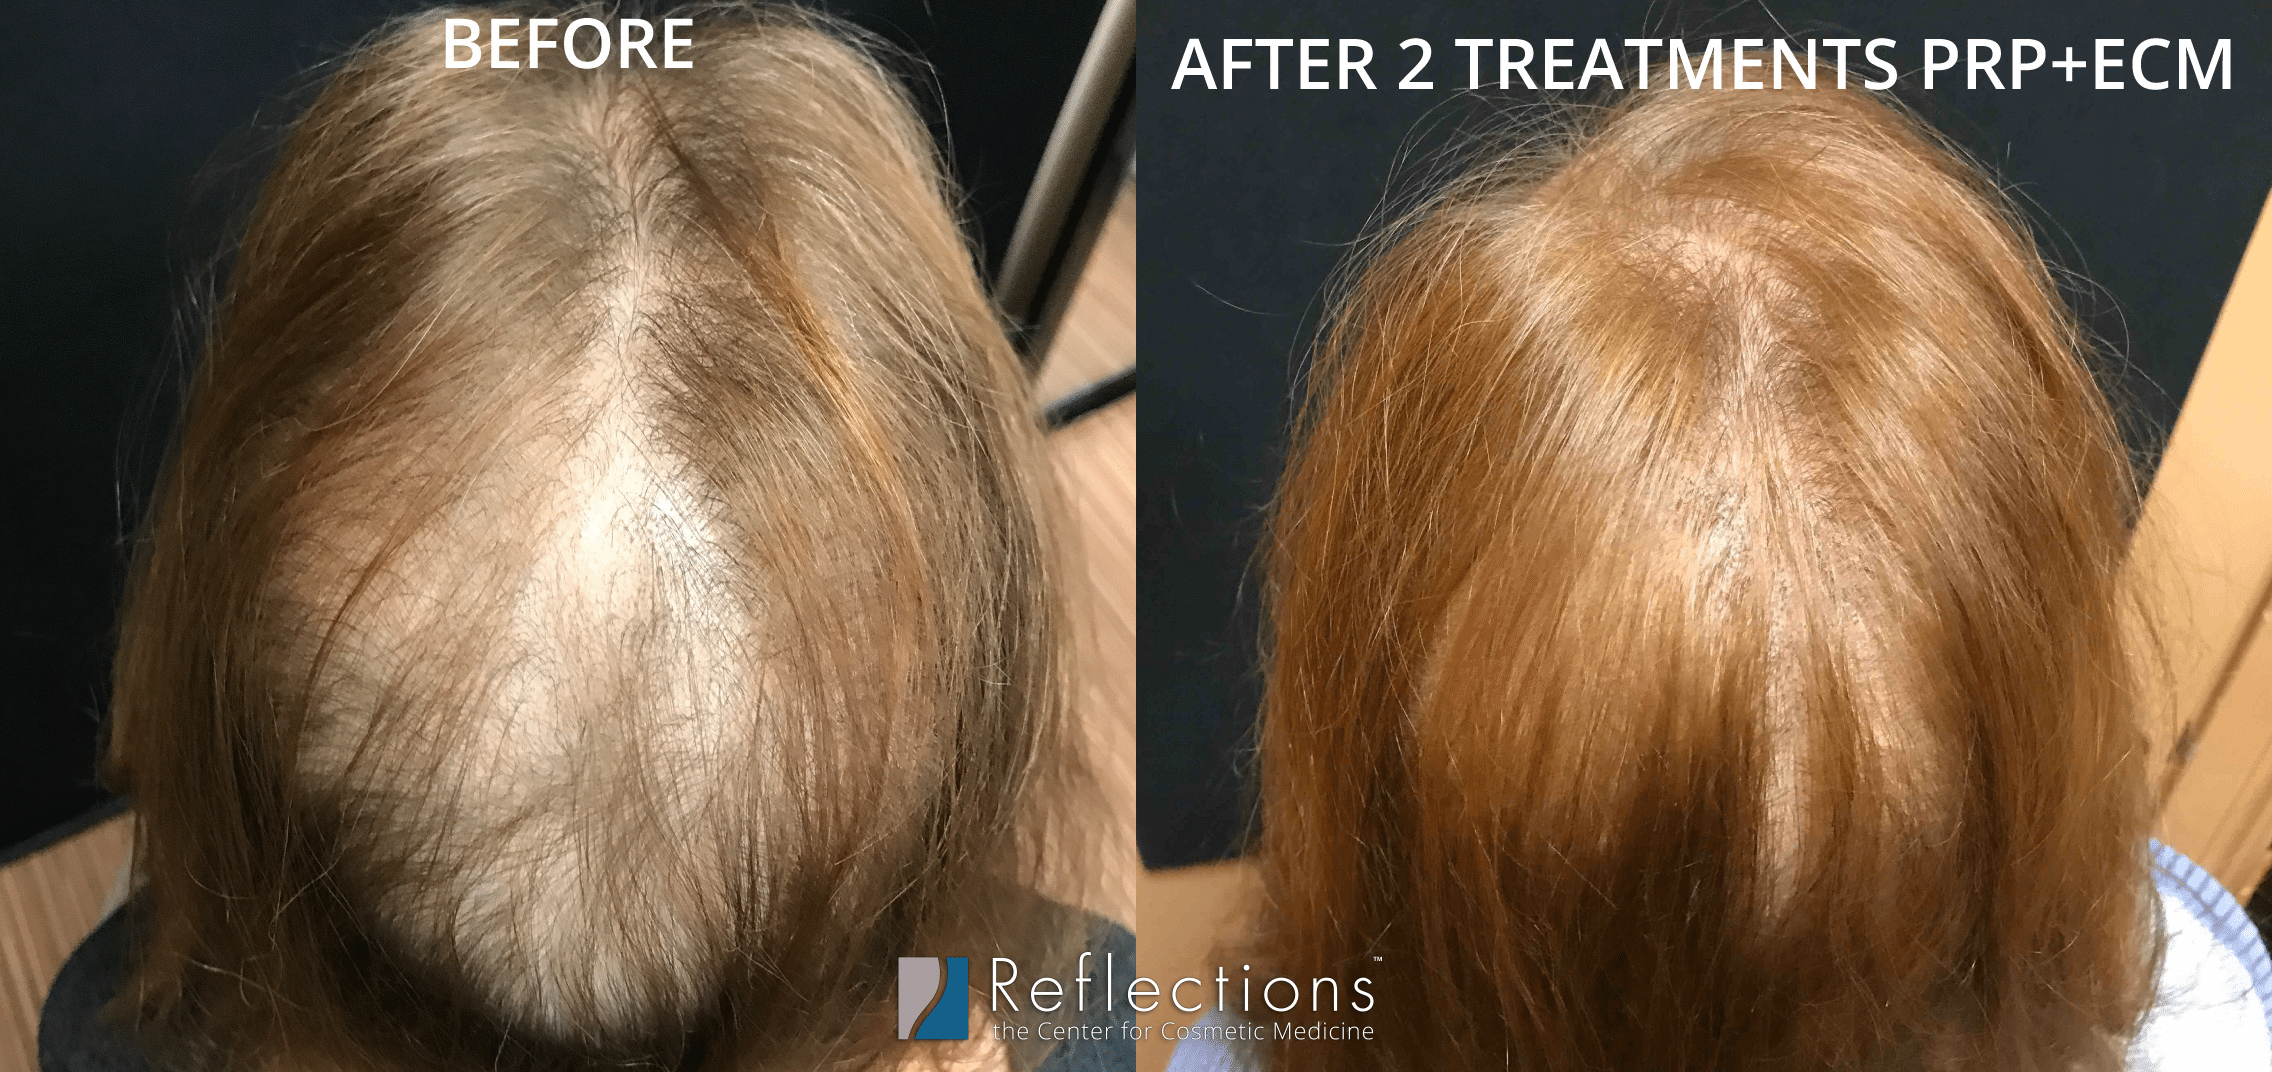 Hair Restoration Injections + Shampoo Results for Woman Before & After  Photos New Jersey - Reflections Center